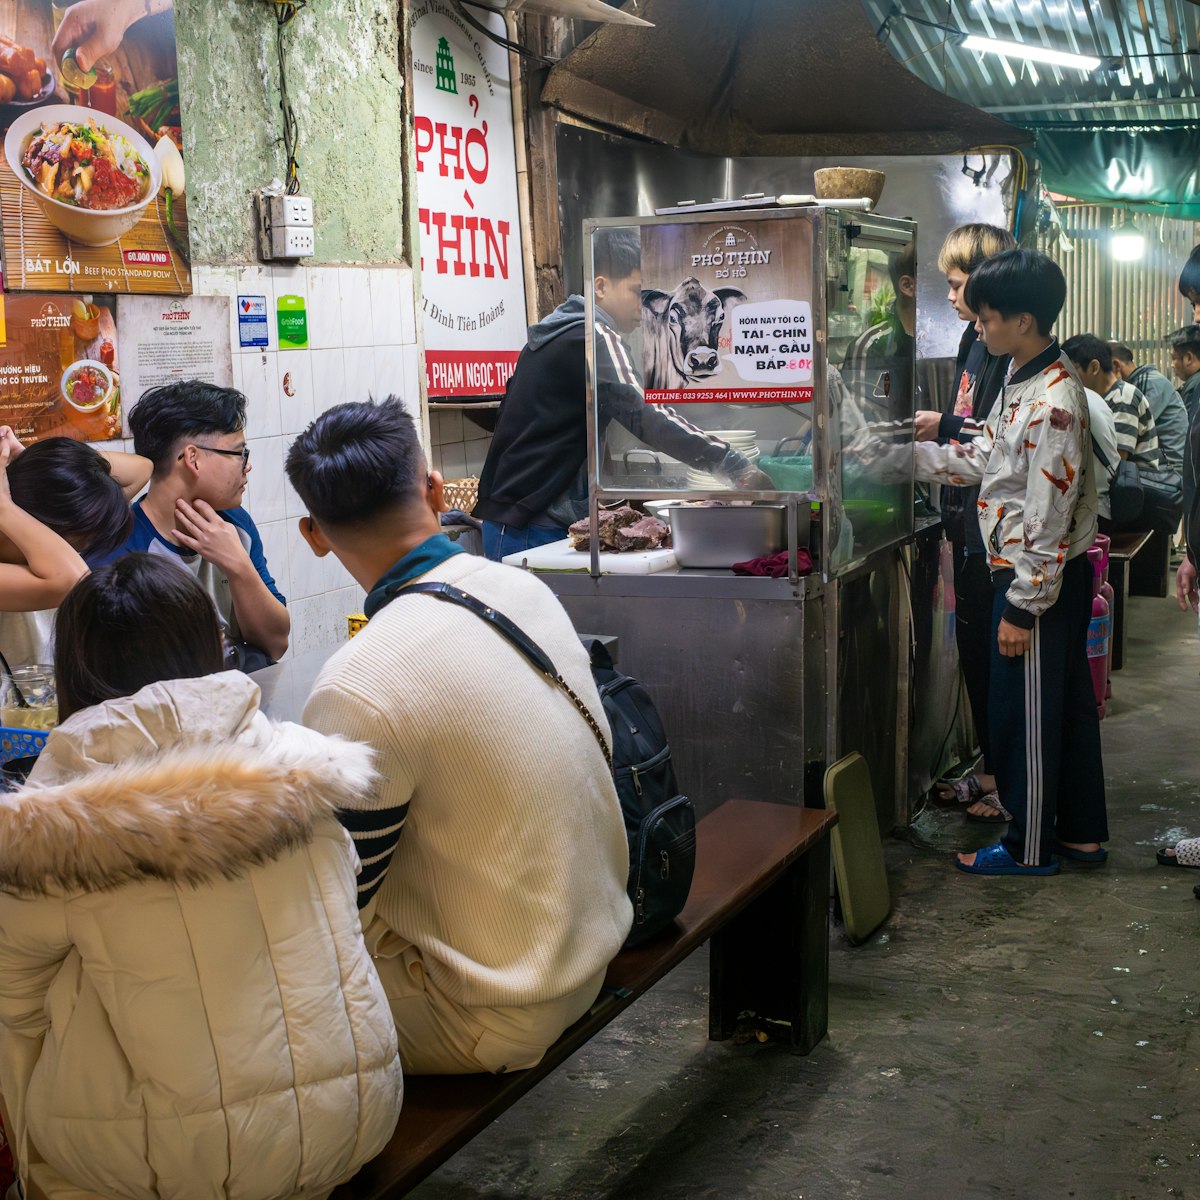 Young people wait at Pho Thin for their traditional bowls of pho, or noodle soup, in Hanoi, Vietnam. Pho can be eaten at any time of day.